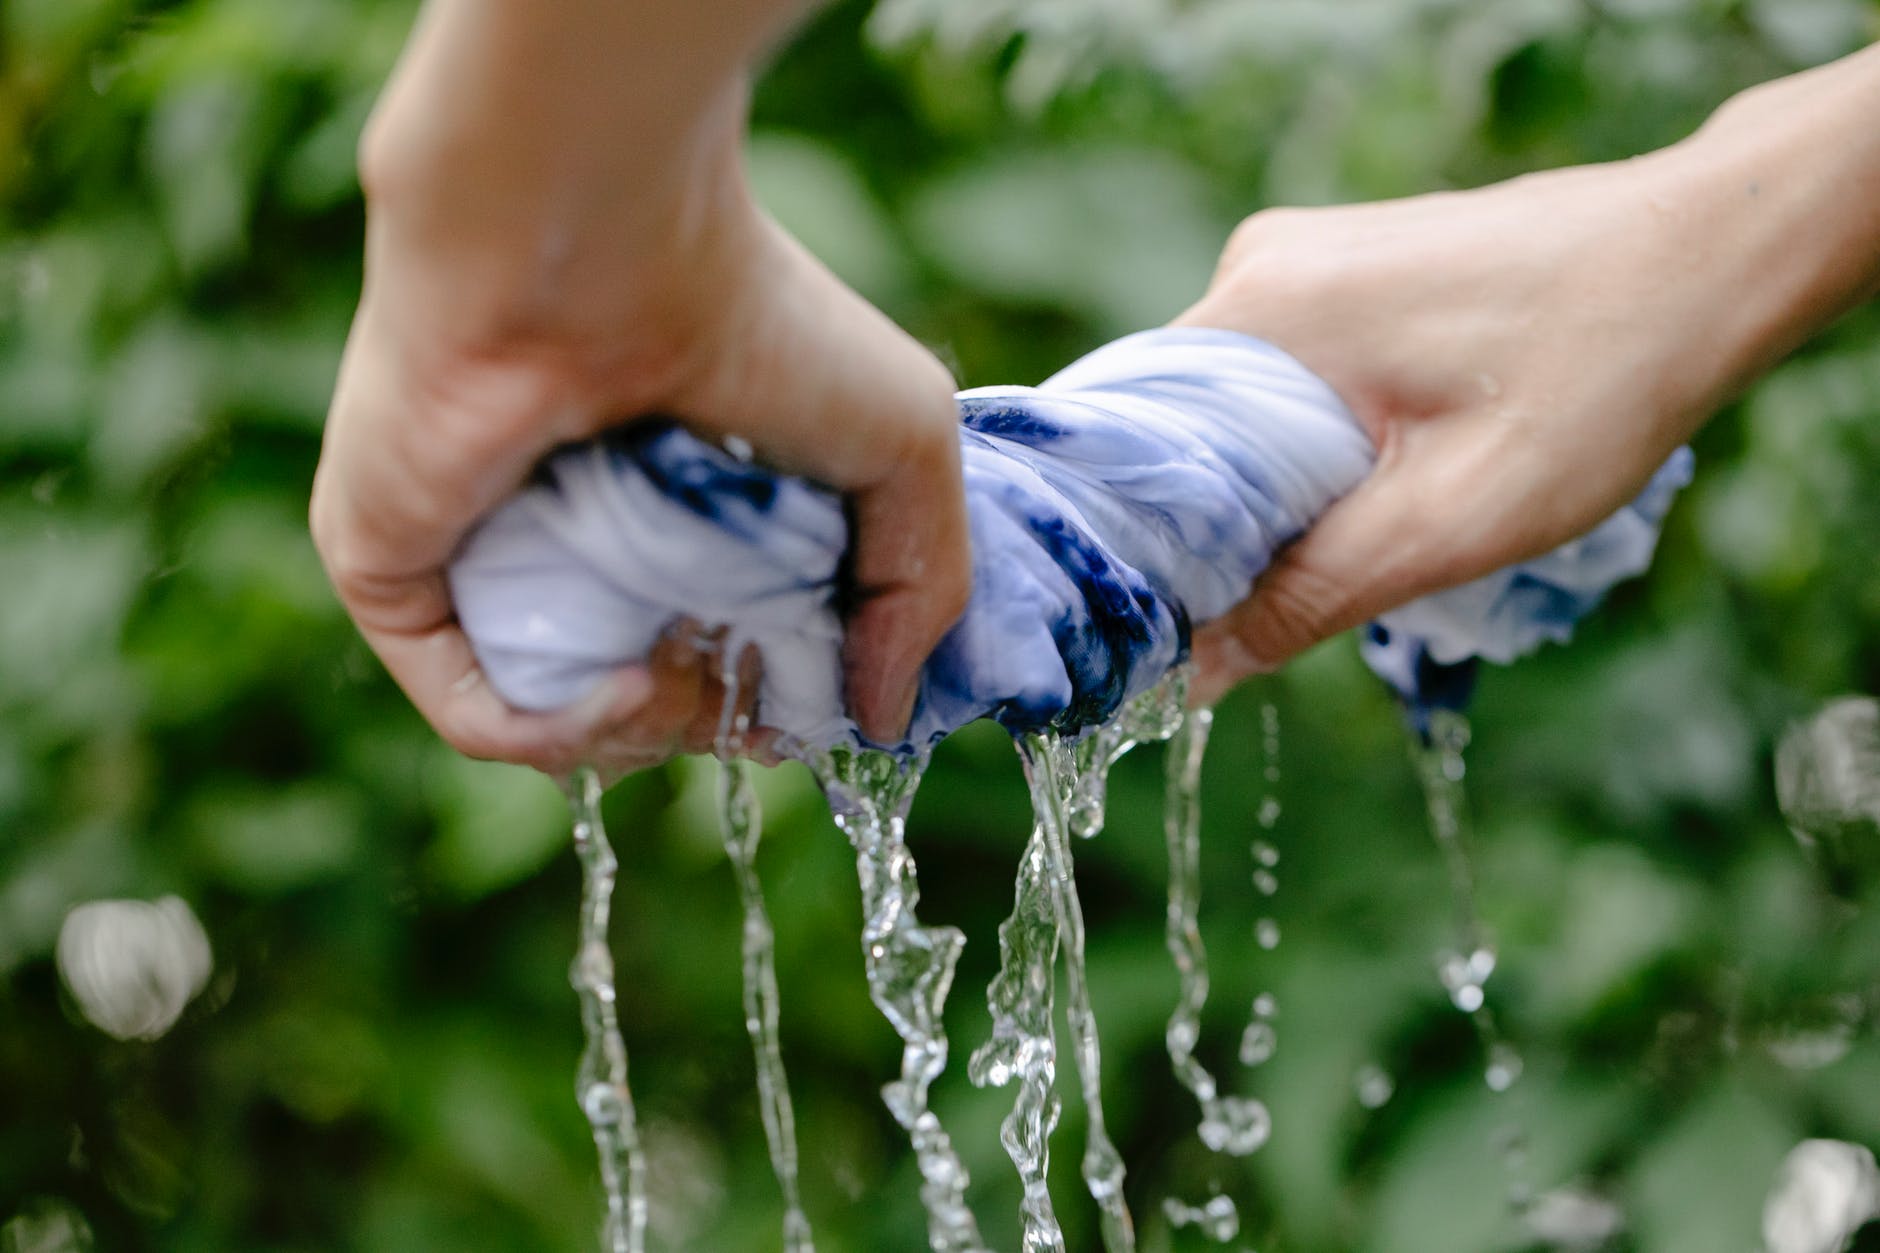 hand washing, squeezing the cloth